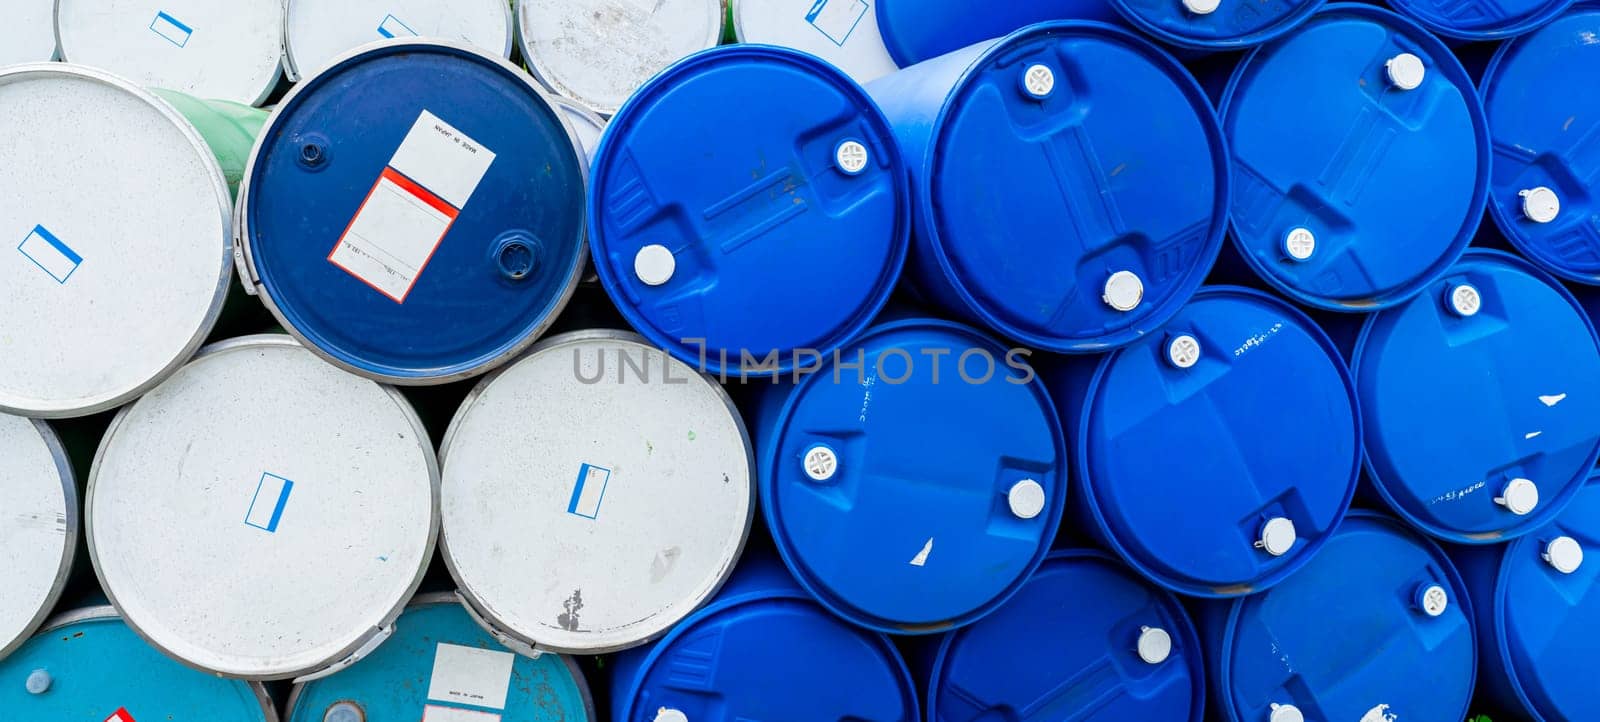 Old chemical barrels. Blue and green oil drum. Steel and plastic oil tank. Toxic waste warehouse. Hazard chemical barrel with warning label. Industrial waste in drum. Hazard waste storage in factory.  by Fahroni